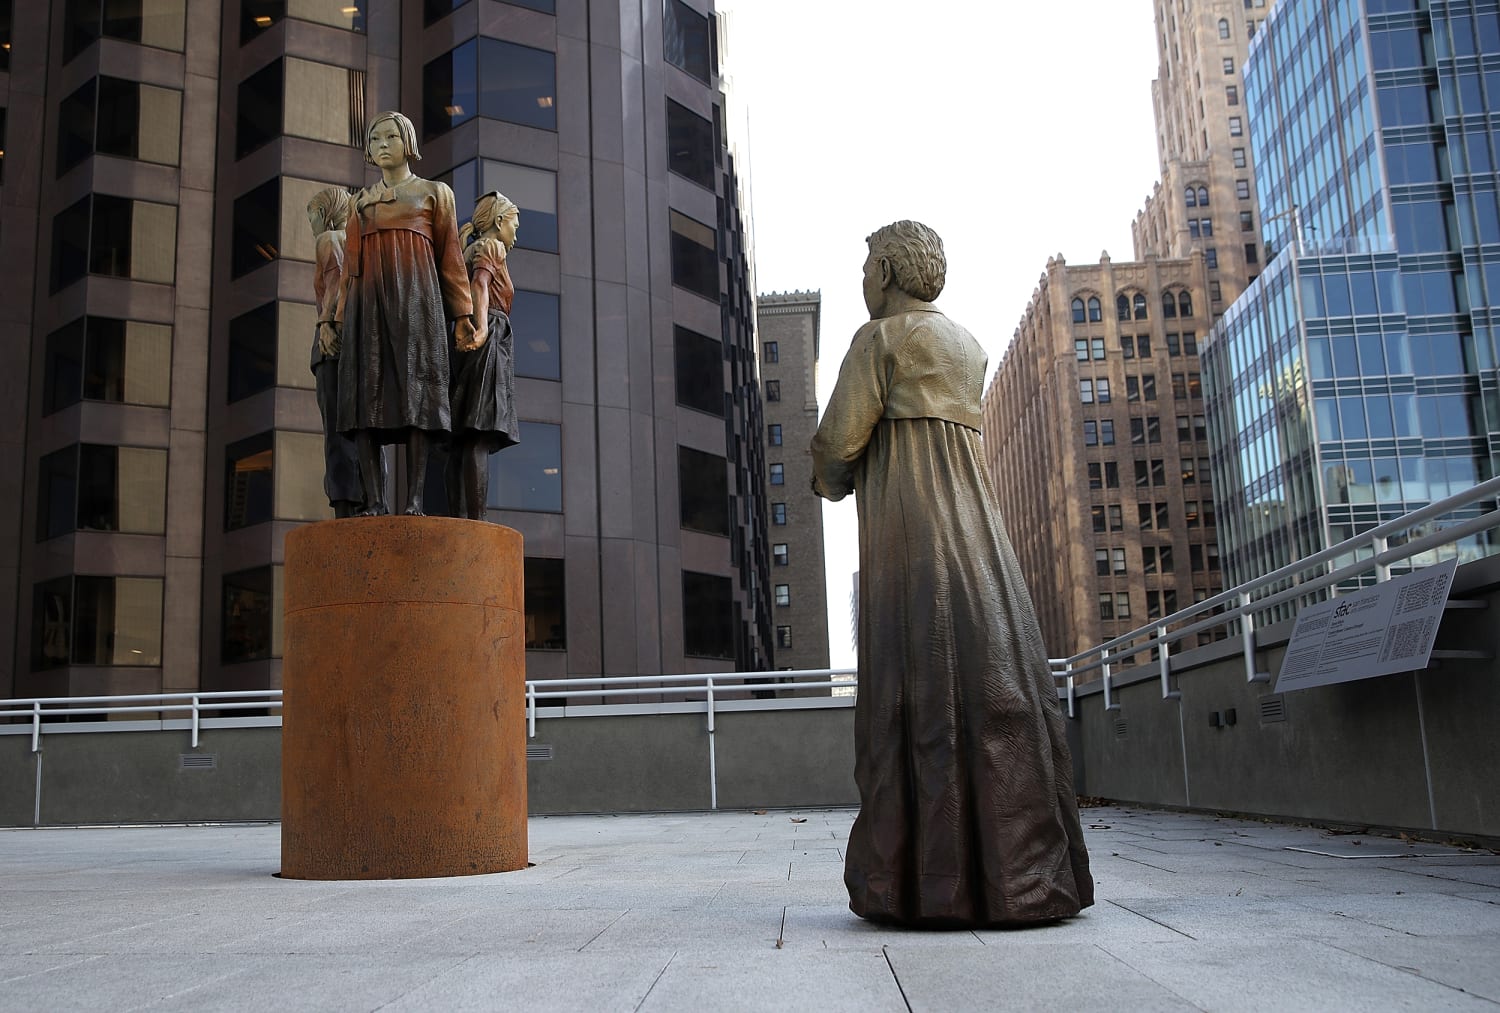 Who are the comfort women, and why are U.S.-based memorials for them controversial? picture